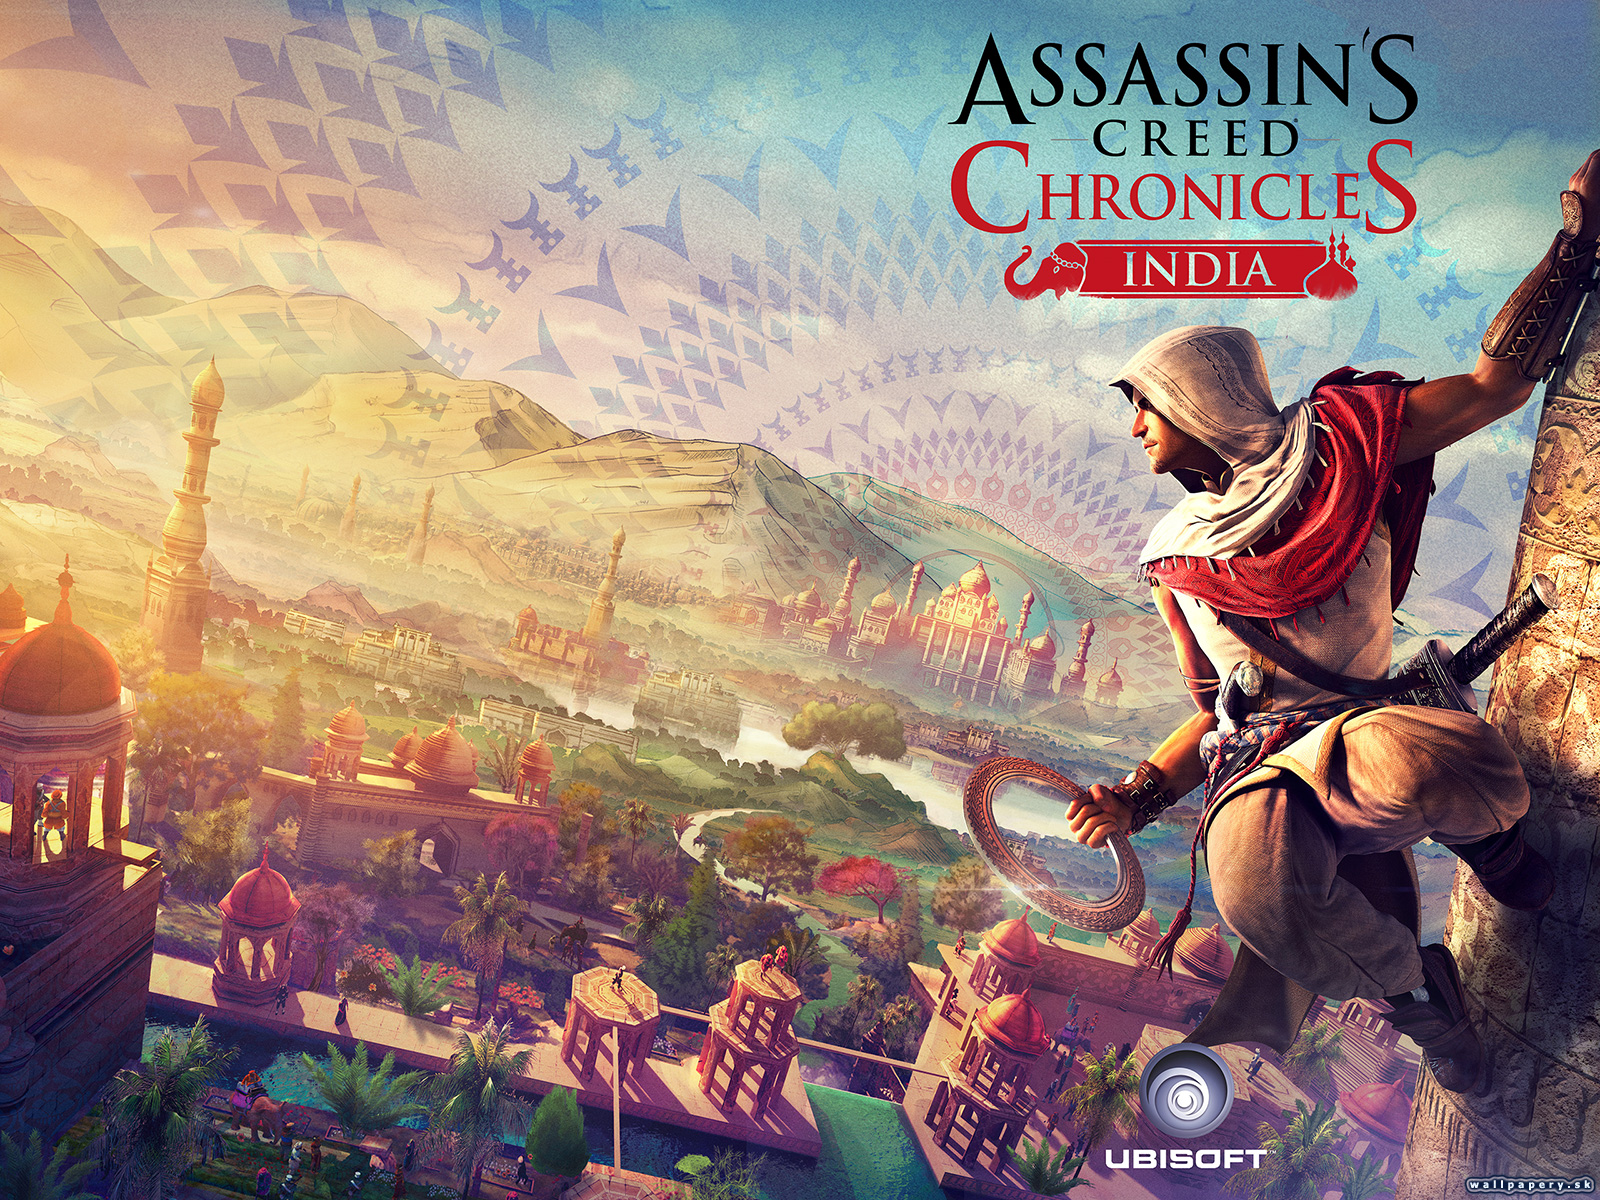 Assassin's Creed Chronicles: India - wallpaper 1